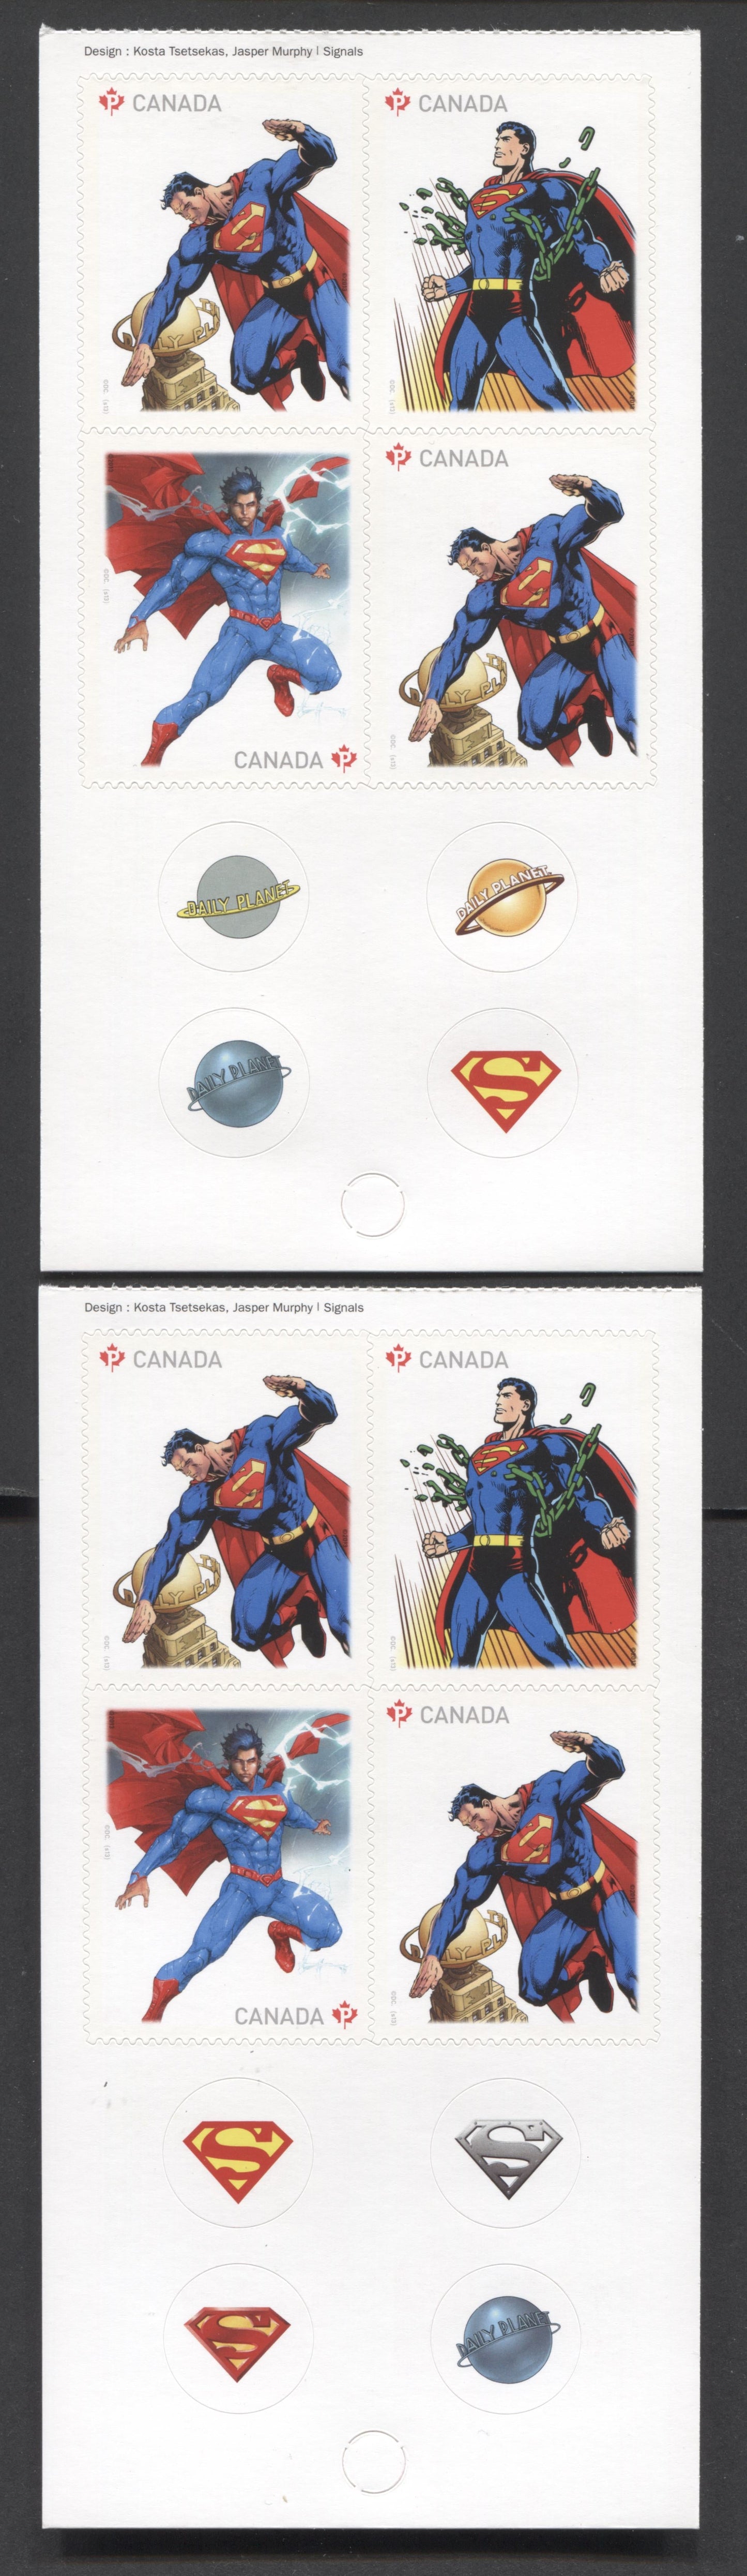 Lot 13 Canada #2681-2683 P(63c) Multicolored Superman, 2013 Superman Issue, 2 VFNH Booklet Pane Of 4 With Different Circular Stickers